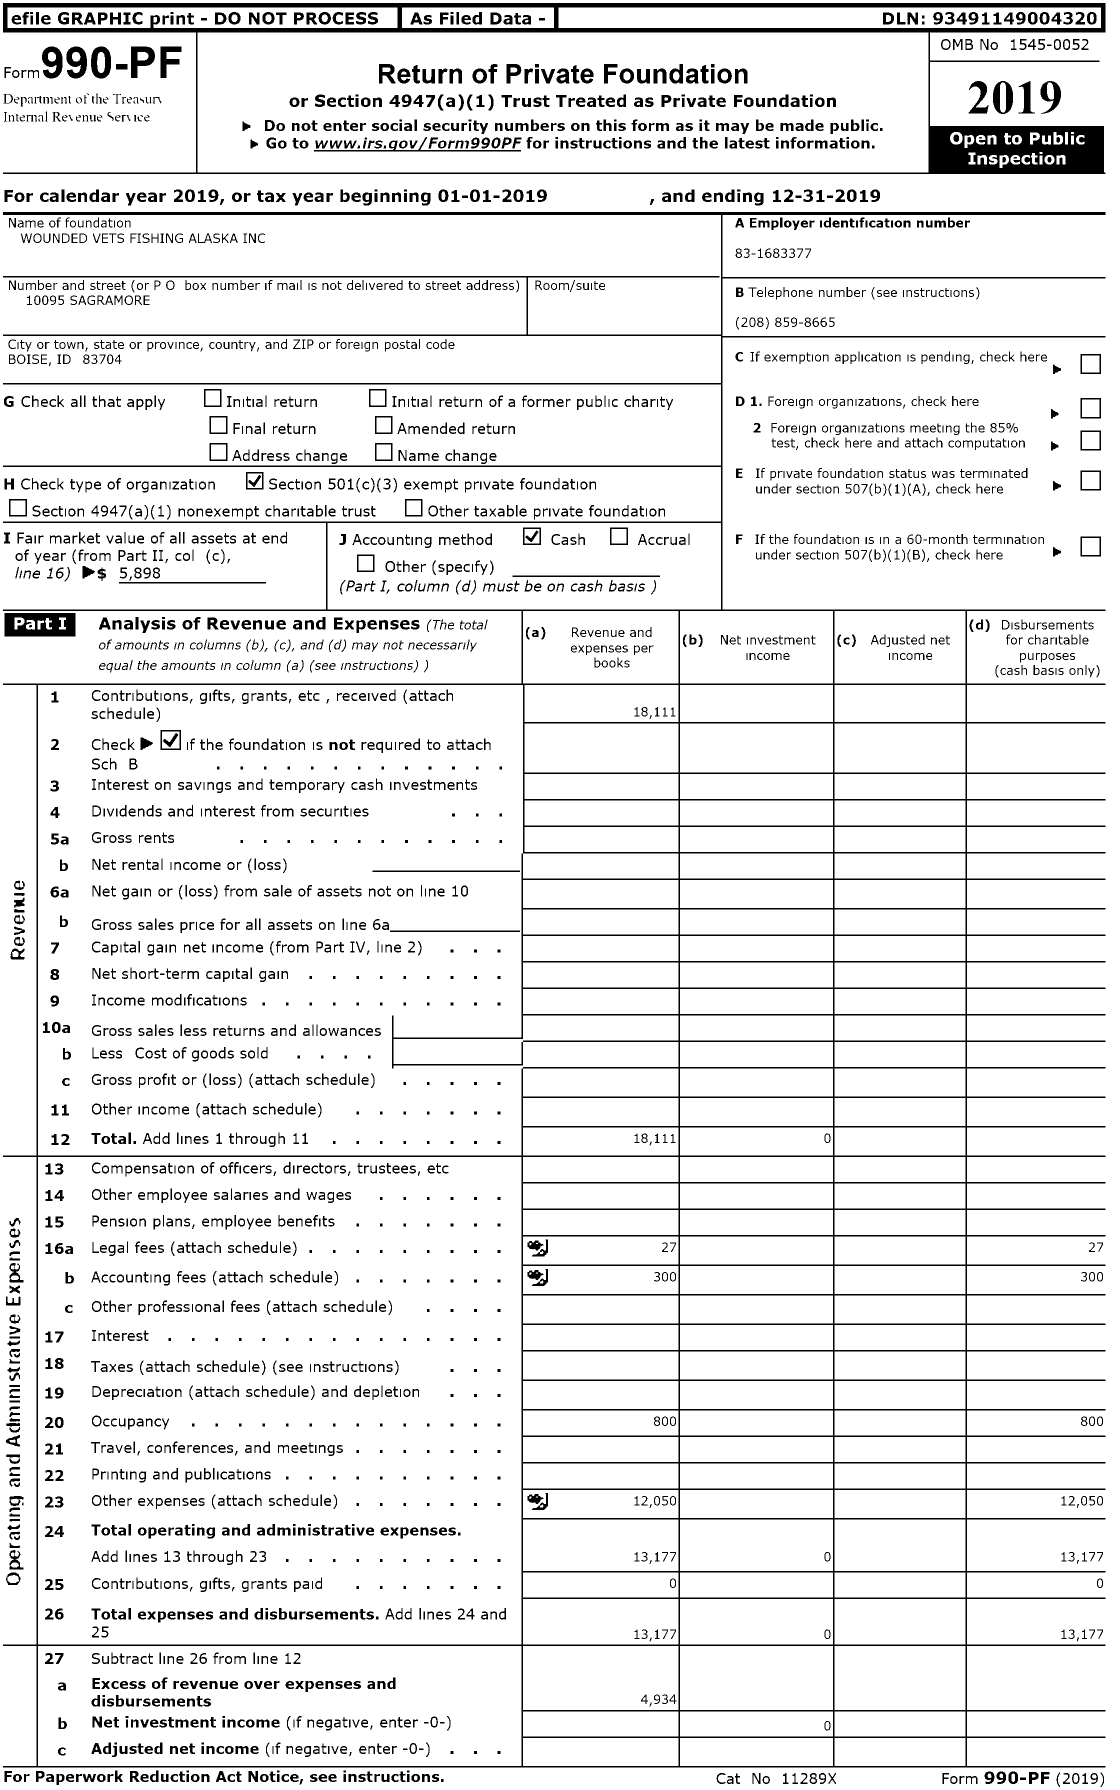 Image of first page of 2019 Form 990PR for Wounded Vets Fishing Alaska